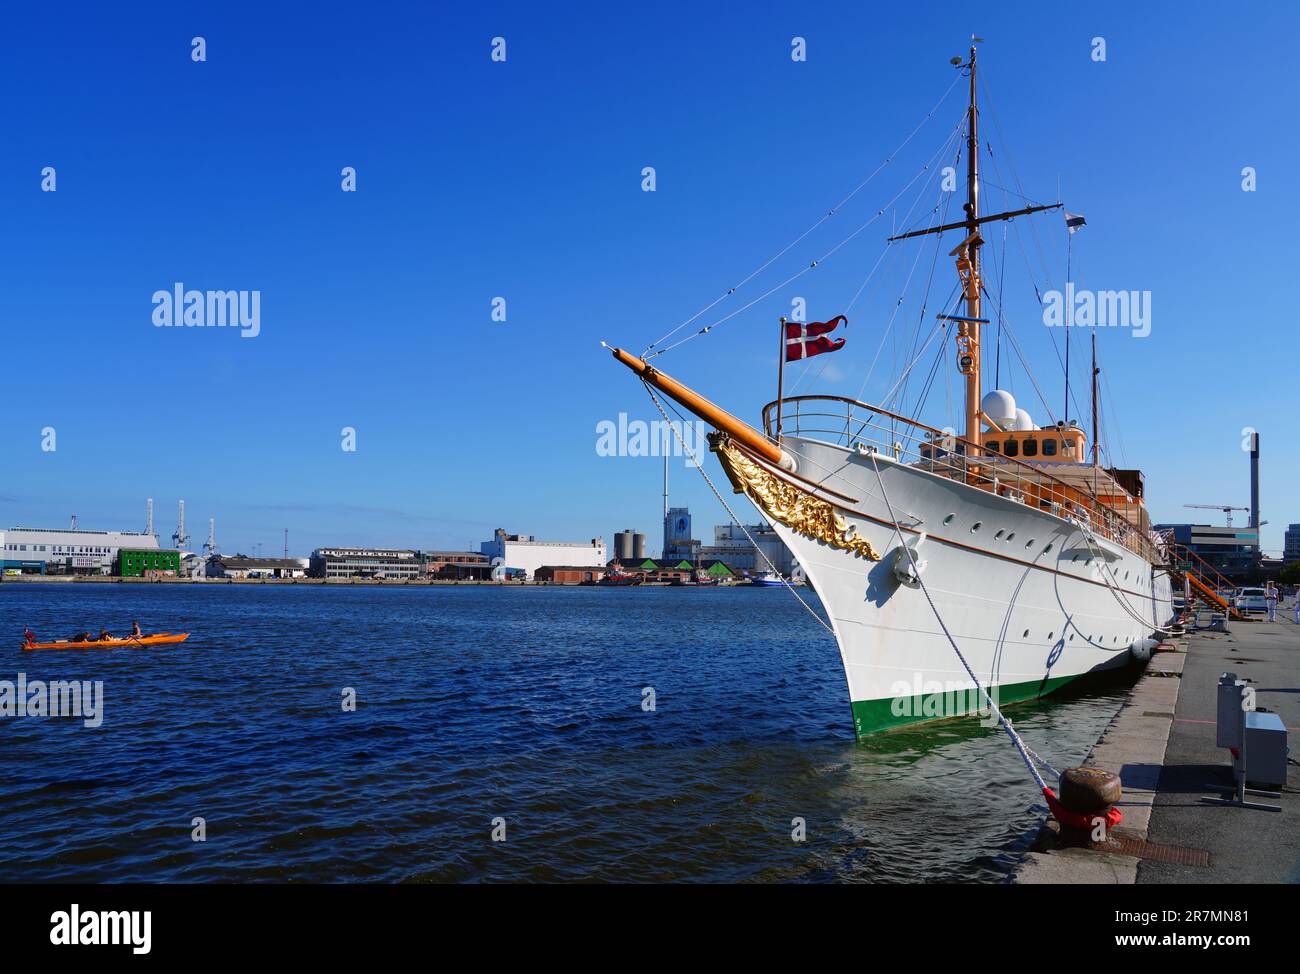 AARHUS, DENMARK -25 AUG 2022- View of the Dannebrog, Her Danish Majesty's Yacht (A540), residence at sea of Queen Margrethe II of Denmark and members Stock Photo